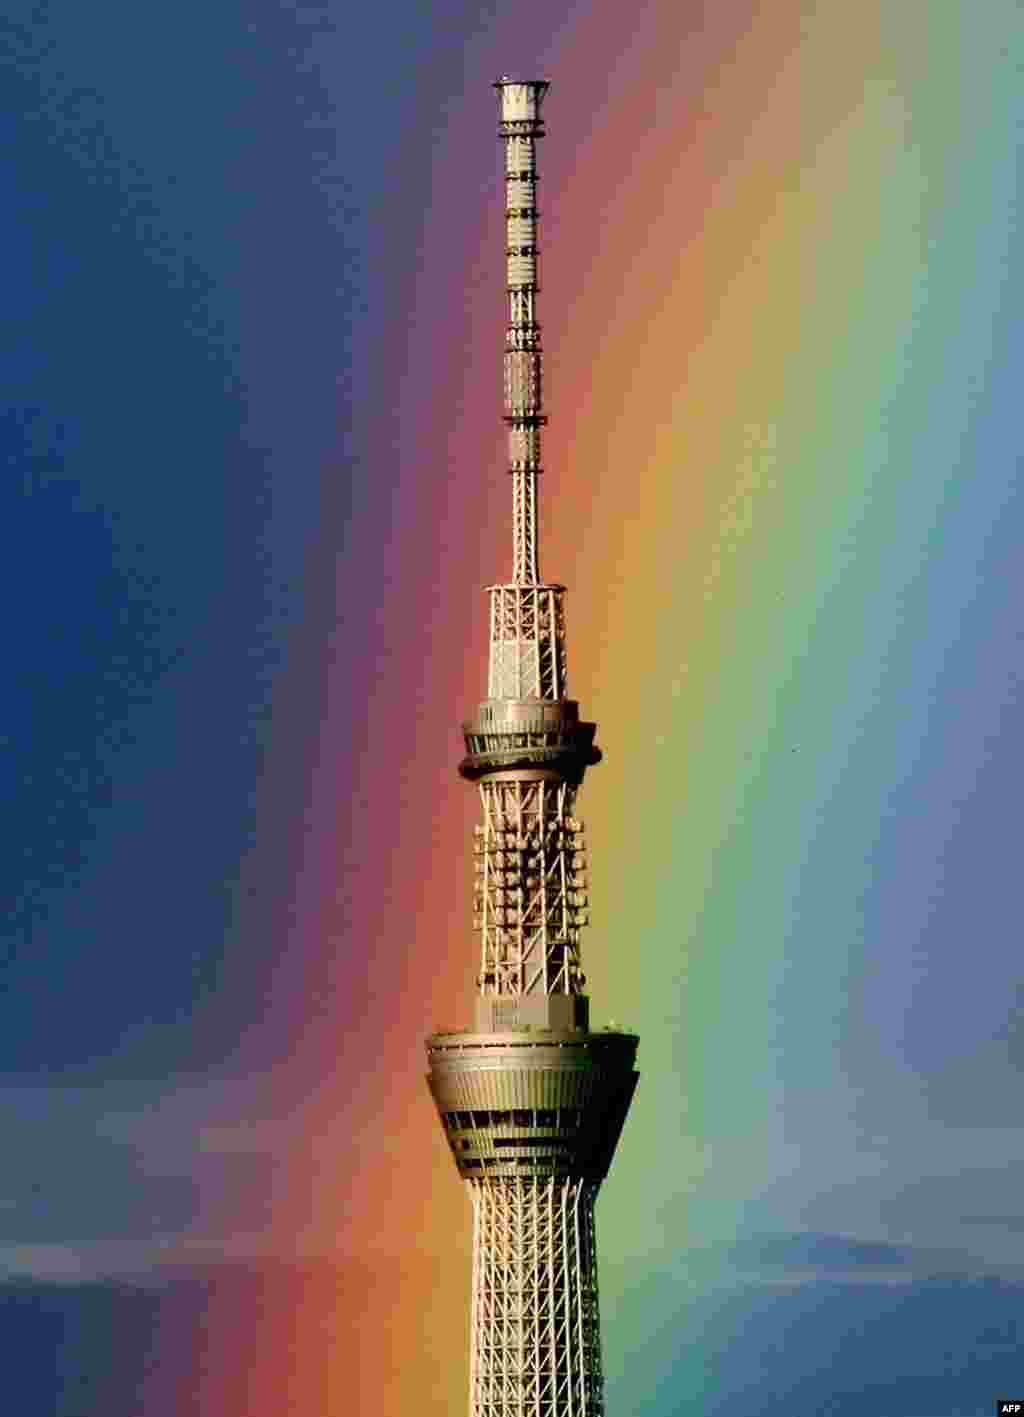 A large rainbow is seen behind the world's tallest radio tower "Tokyo Skytree" in Tokyo, Japan.